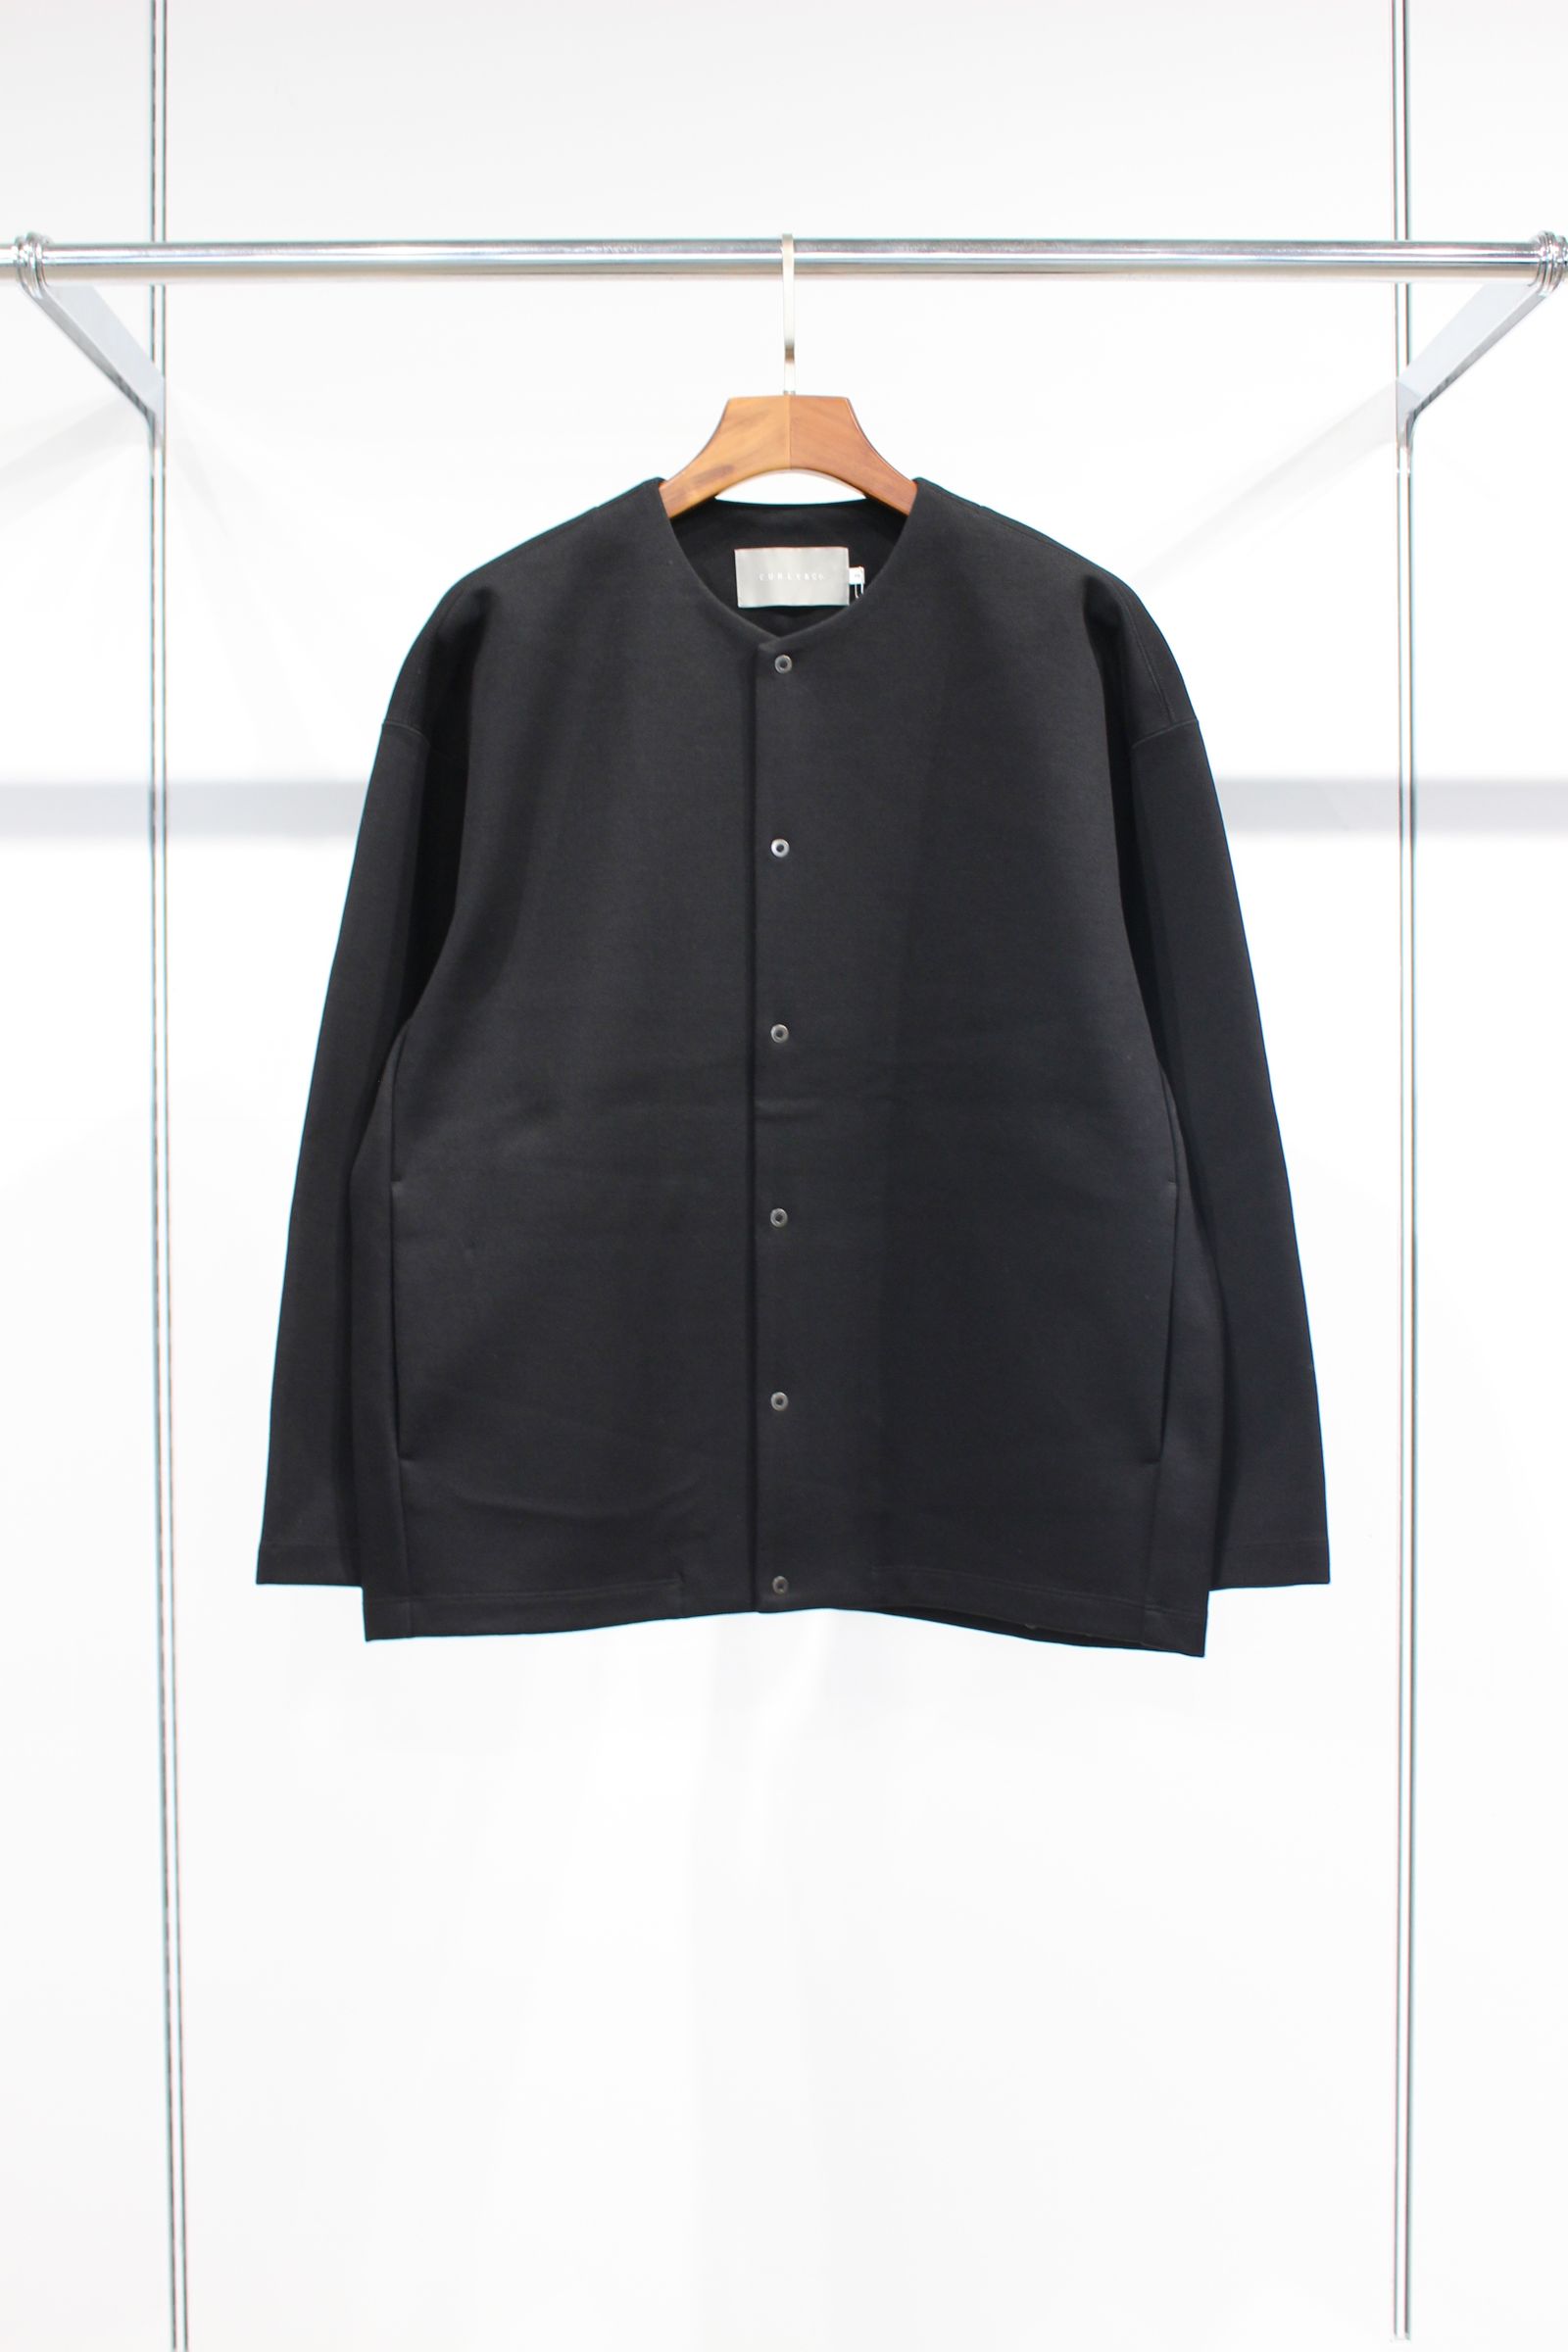 CURLY - SNAP BUTTON CARDIGAN -solid-/BLACK | NapsNote